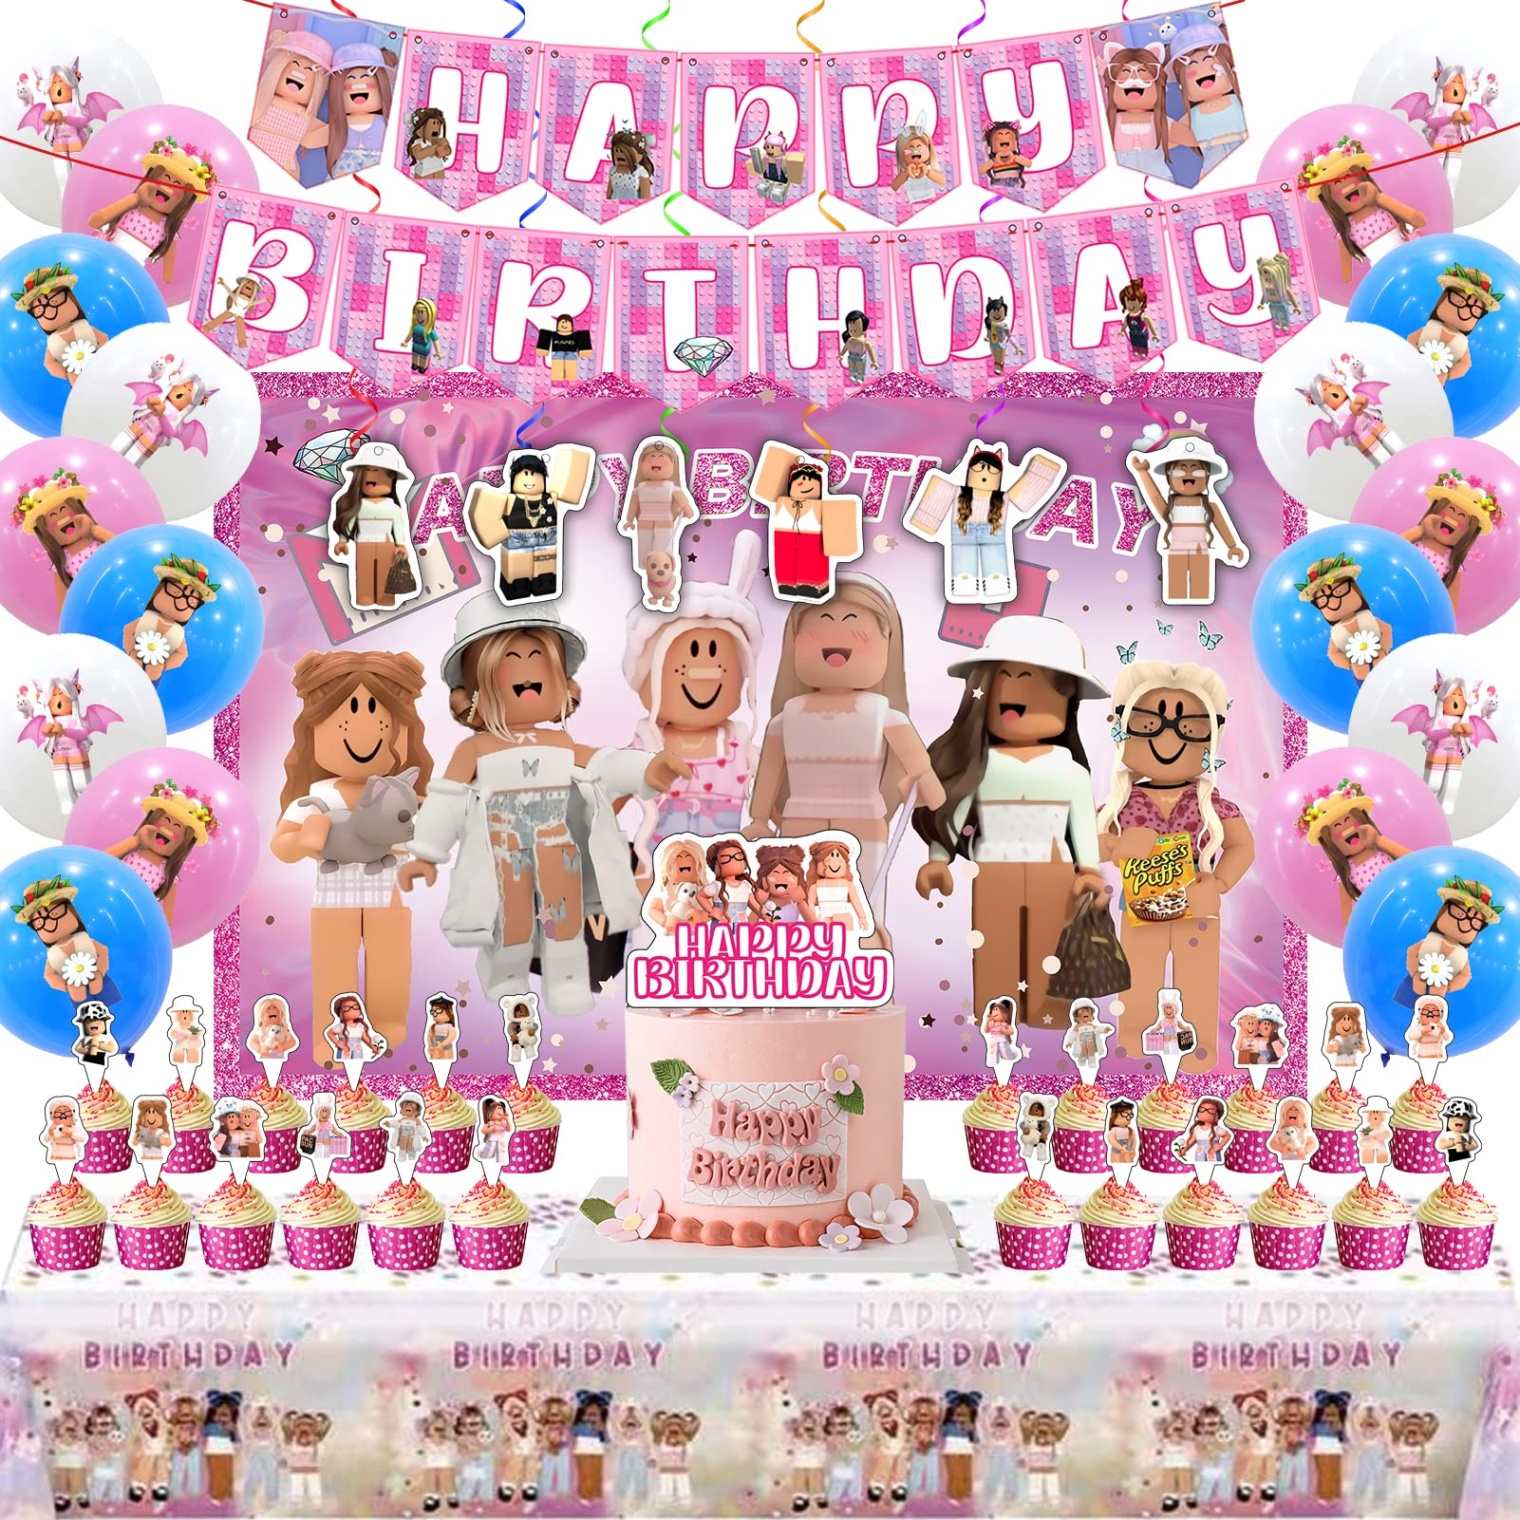 roblox party decoration Niche Utama Home Birthday Party Supplies, Party Decorations Include Happy Birthday Banner,  Backdrop, Tablecloth, Cake Toppers, Hanging Swirls, Cupcake Toppers, Latex